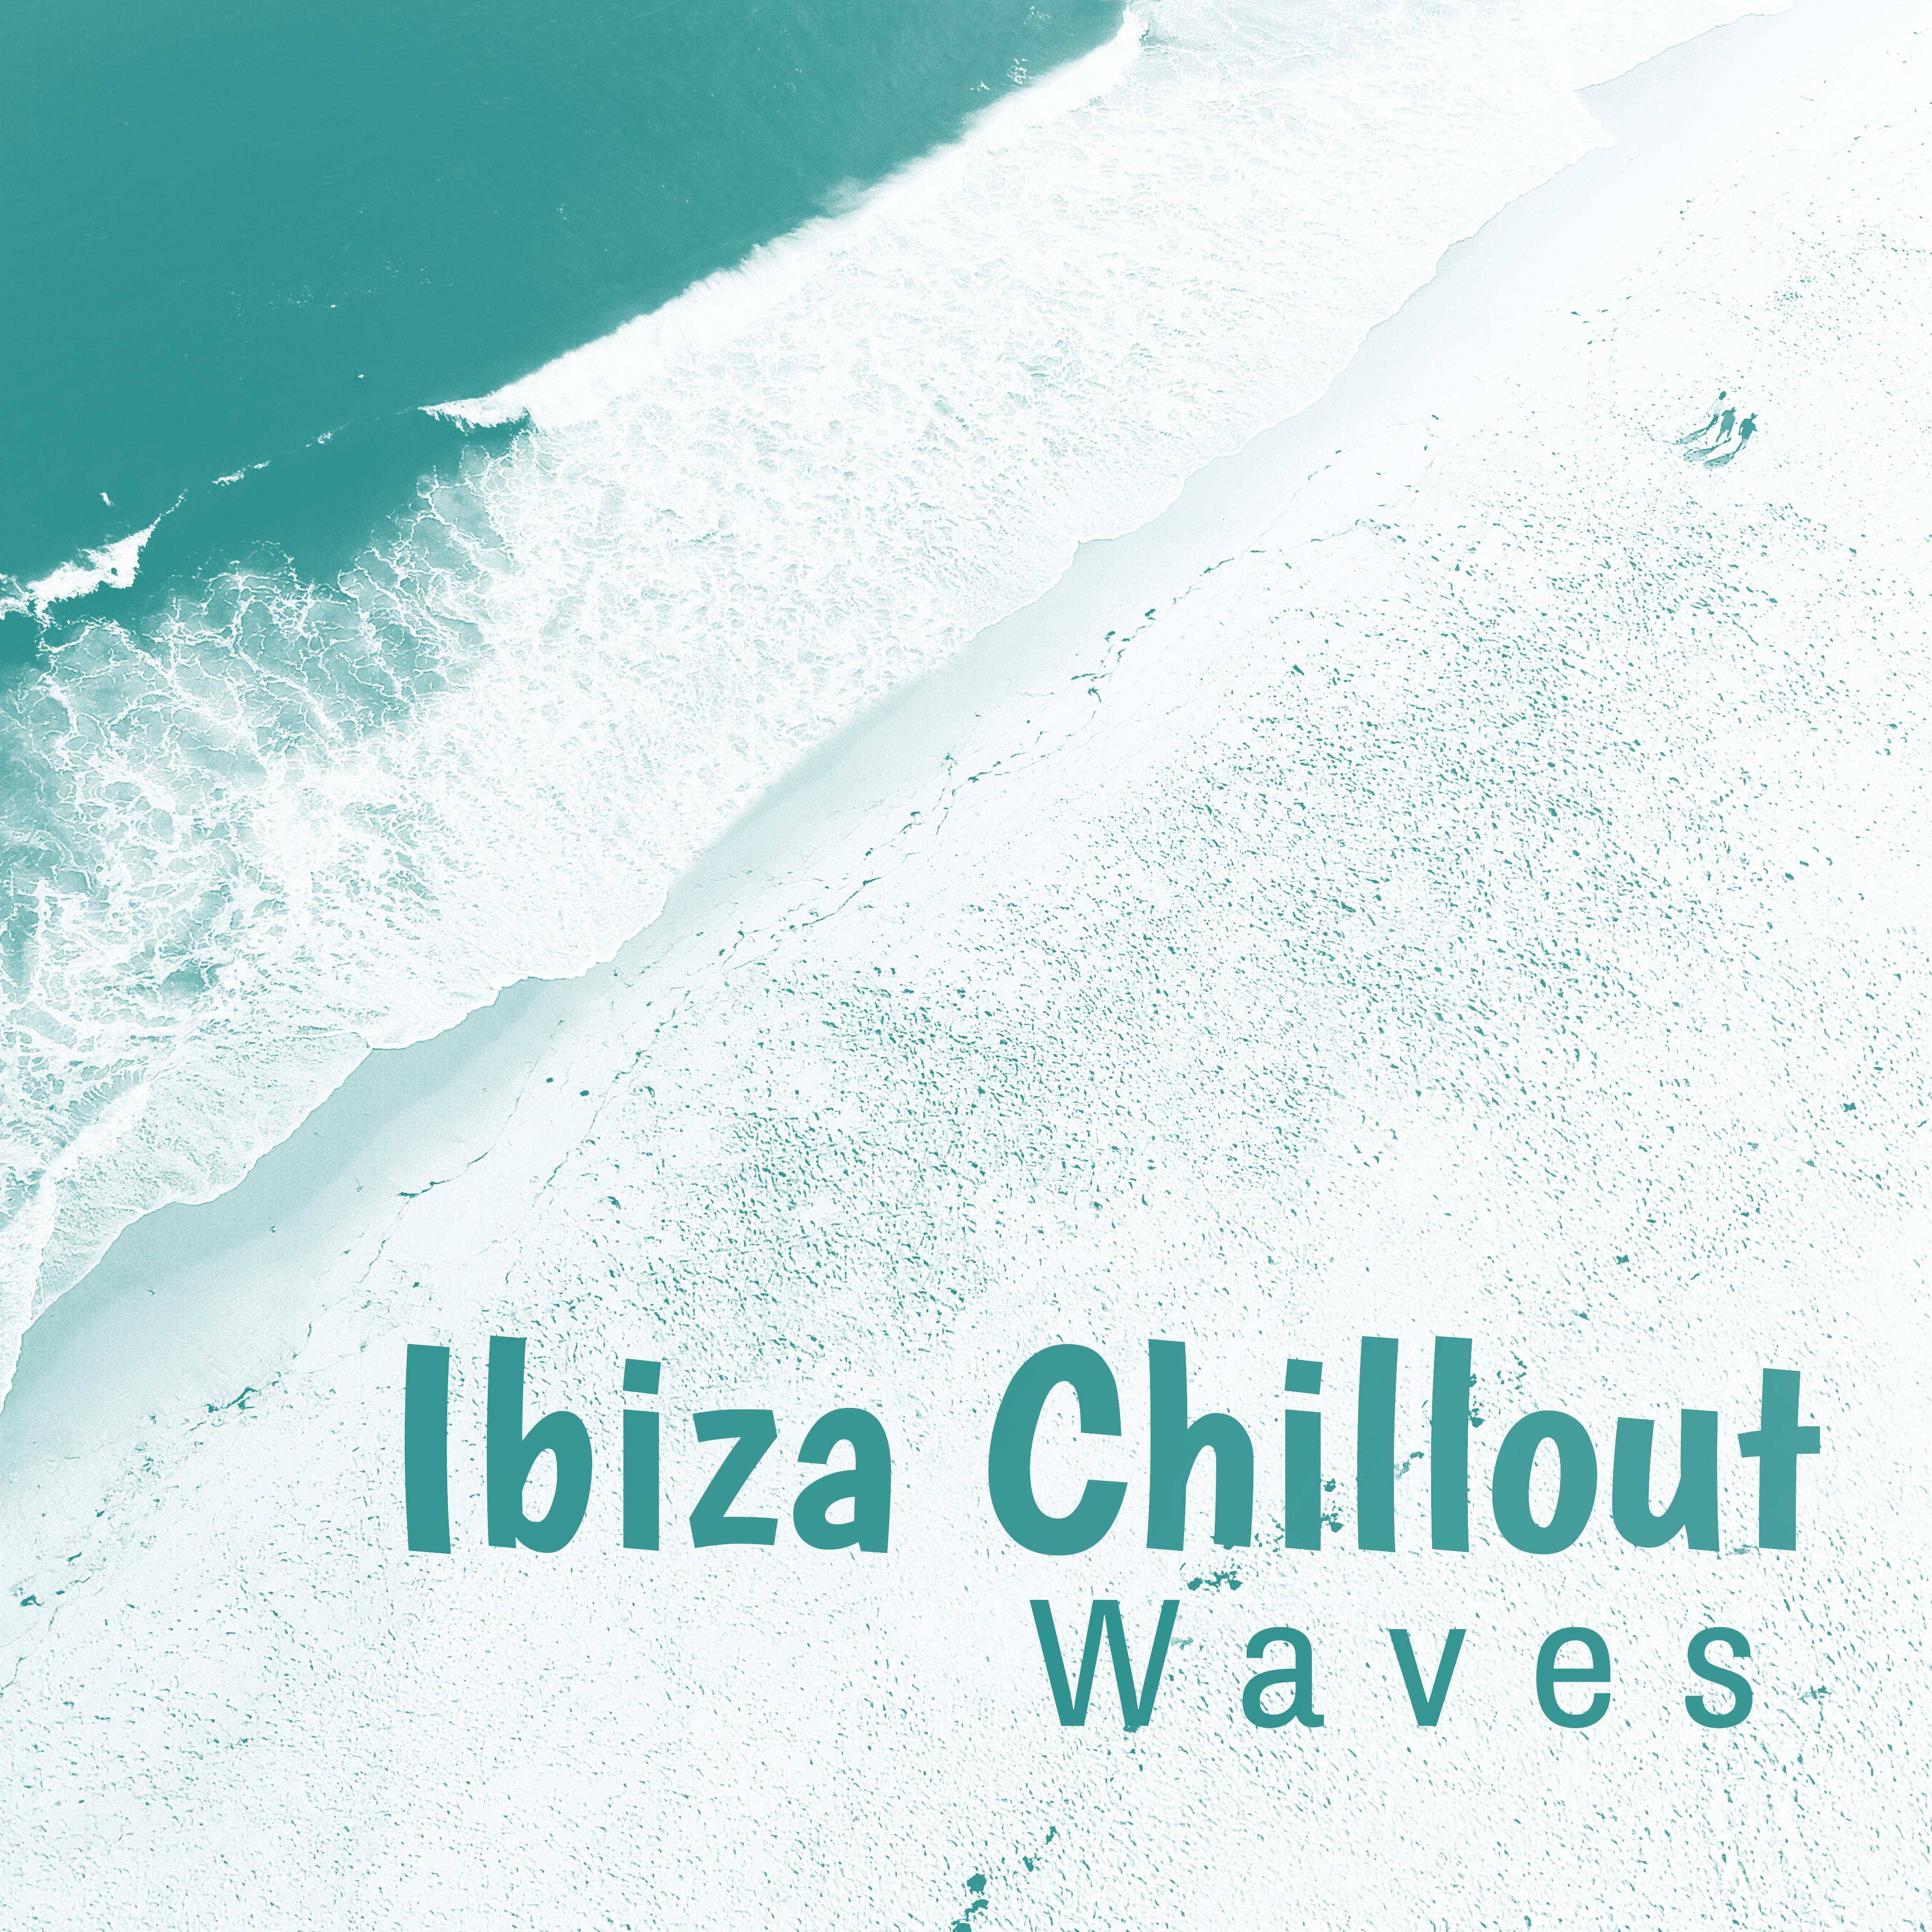 Ibiza Chillout Waves – Summer Relaxation, Peaceful Chill Out Music, Rest a Bit, Sounds of Holiday